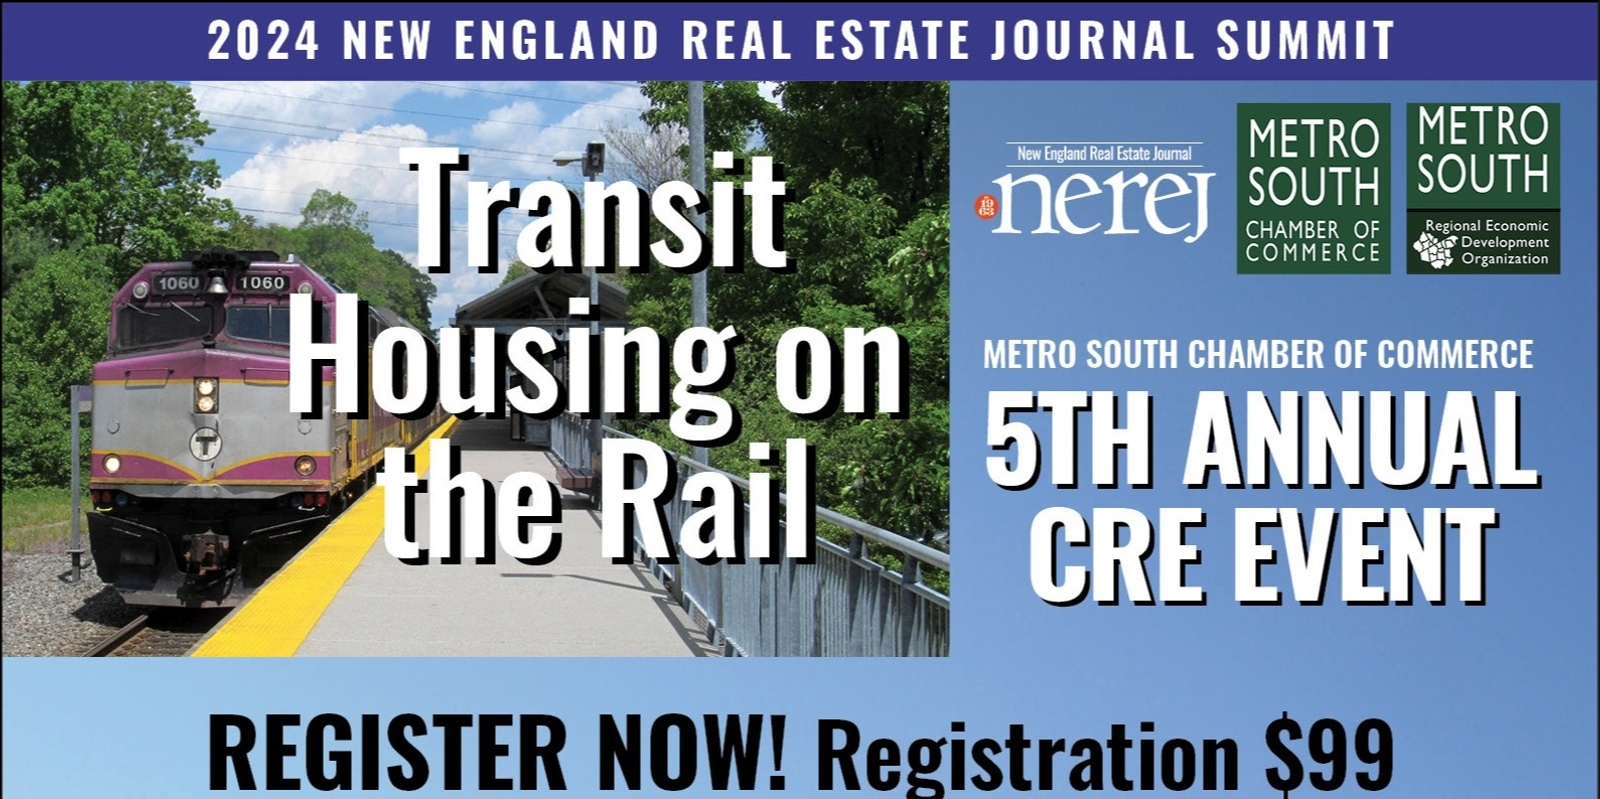 Banner image for NEREJ / Metro South 5th Annual CRE Event